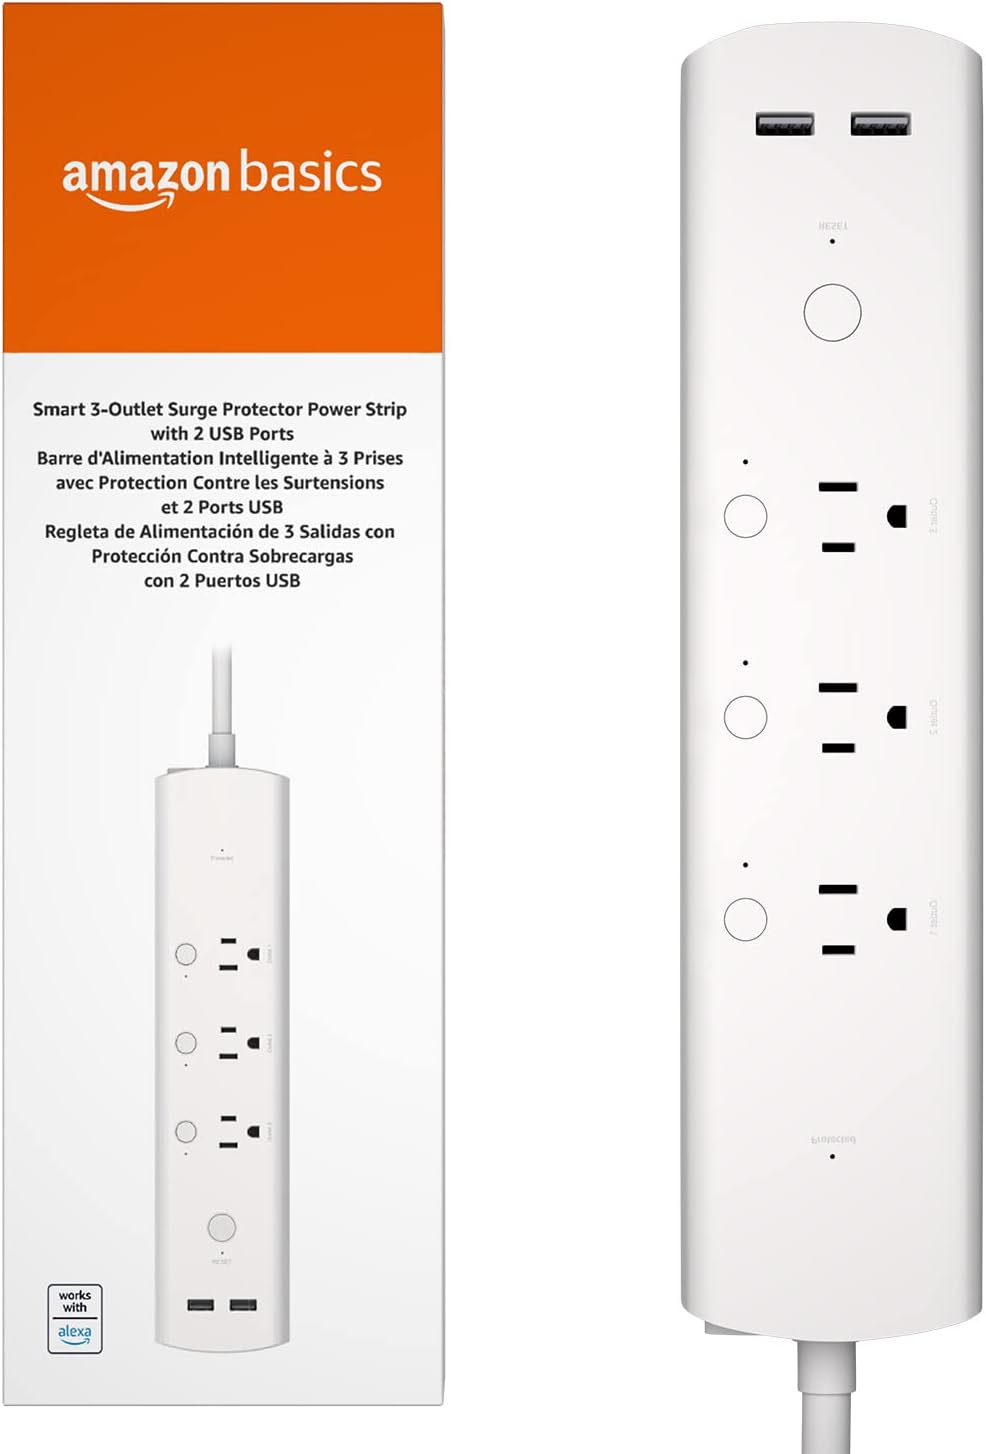 Amazon Basics Rectangular Smart Plug Power Strip, Surge Protector with 3 Individually Controlled Smart Outlets and 2 USB Ports, 2.4 GHz Wi-Fi, Works with Alexa, White, 11.02 x 2.56 x 1.38 in